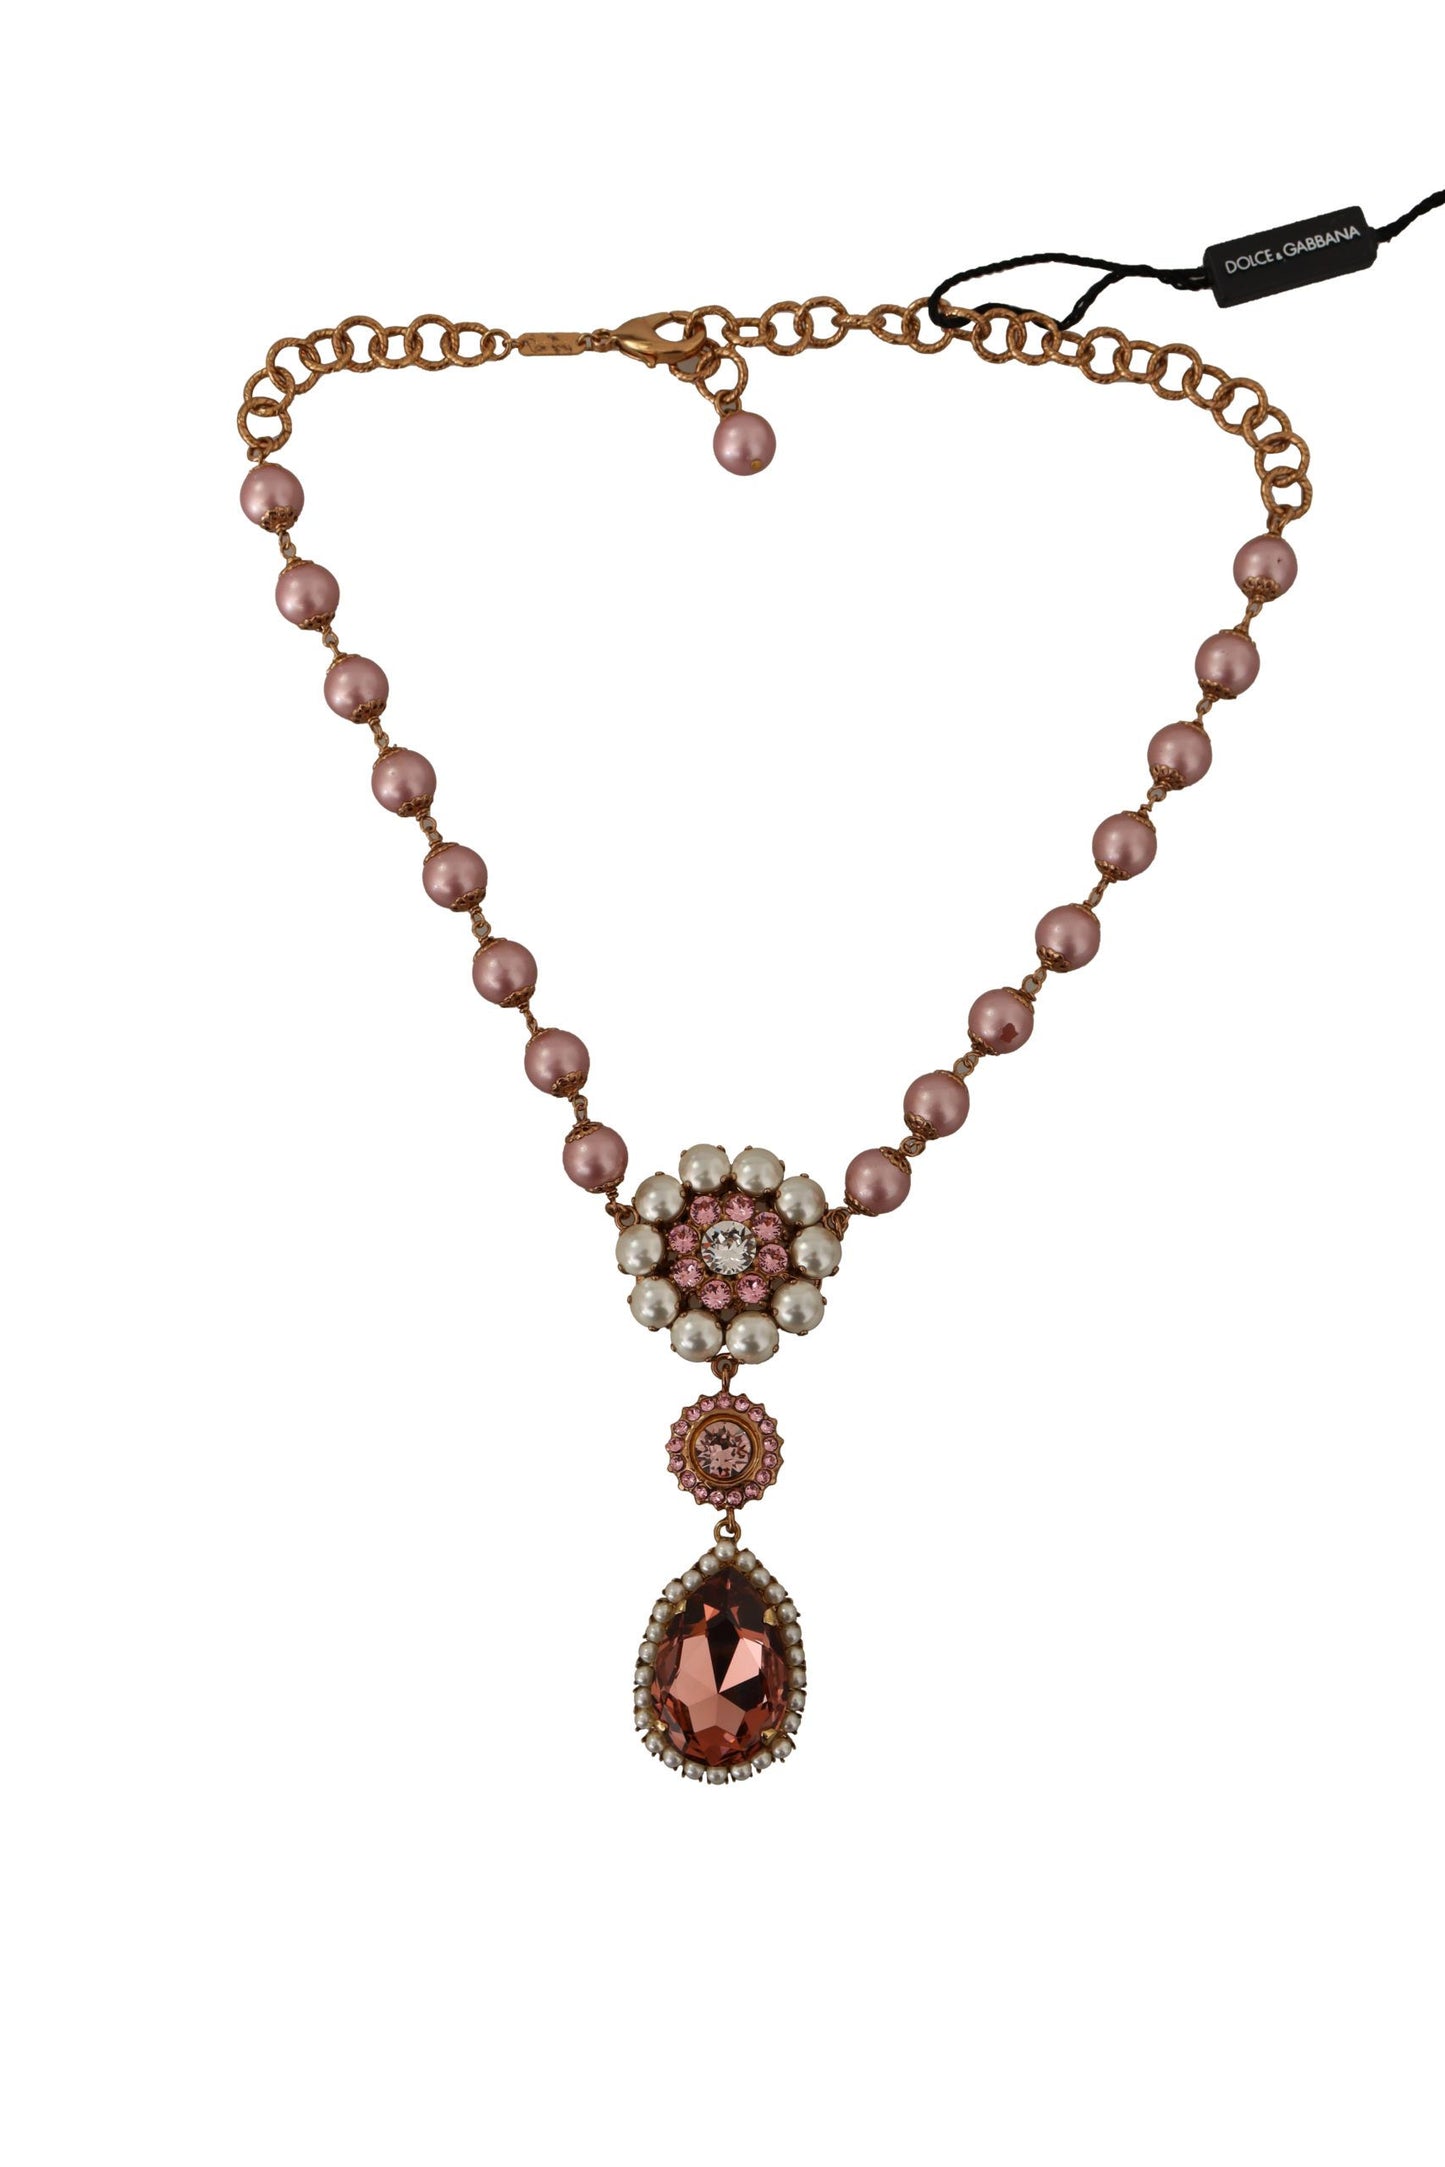 Dolce & Gabbana Gold Tone Brass Pink Beaded Pearls Crystal Pendant Necklace